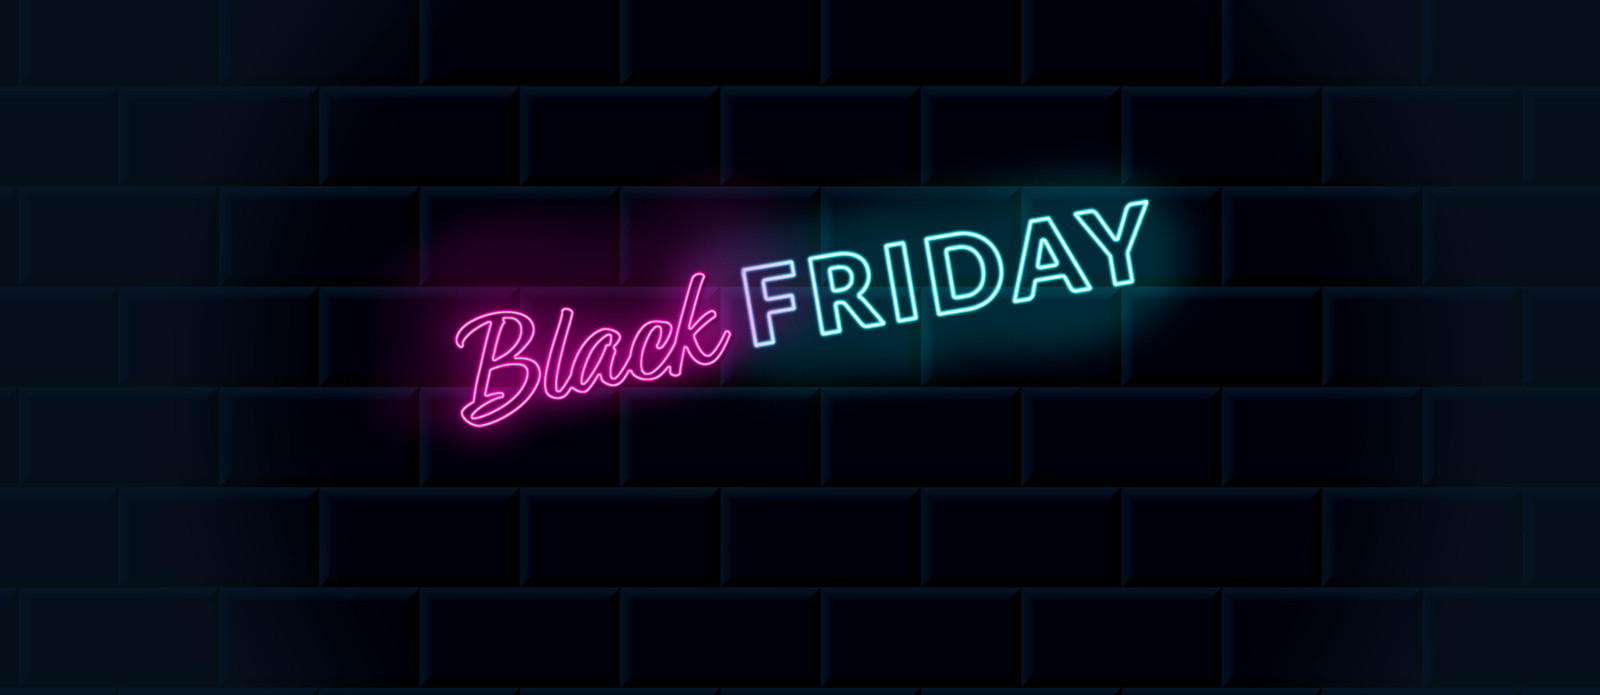 Black Friday Hotel Deals NYC - Save Up to 50%